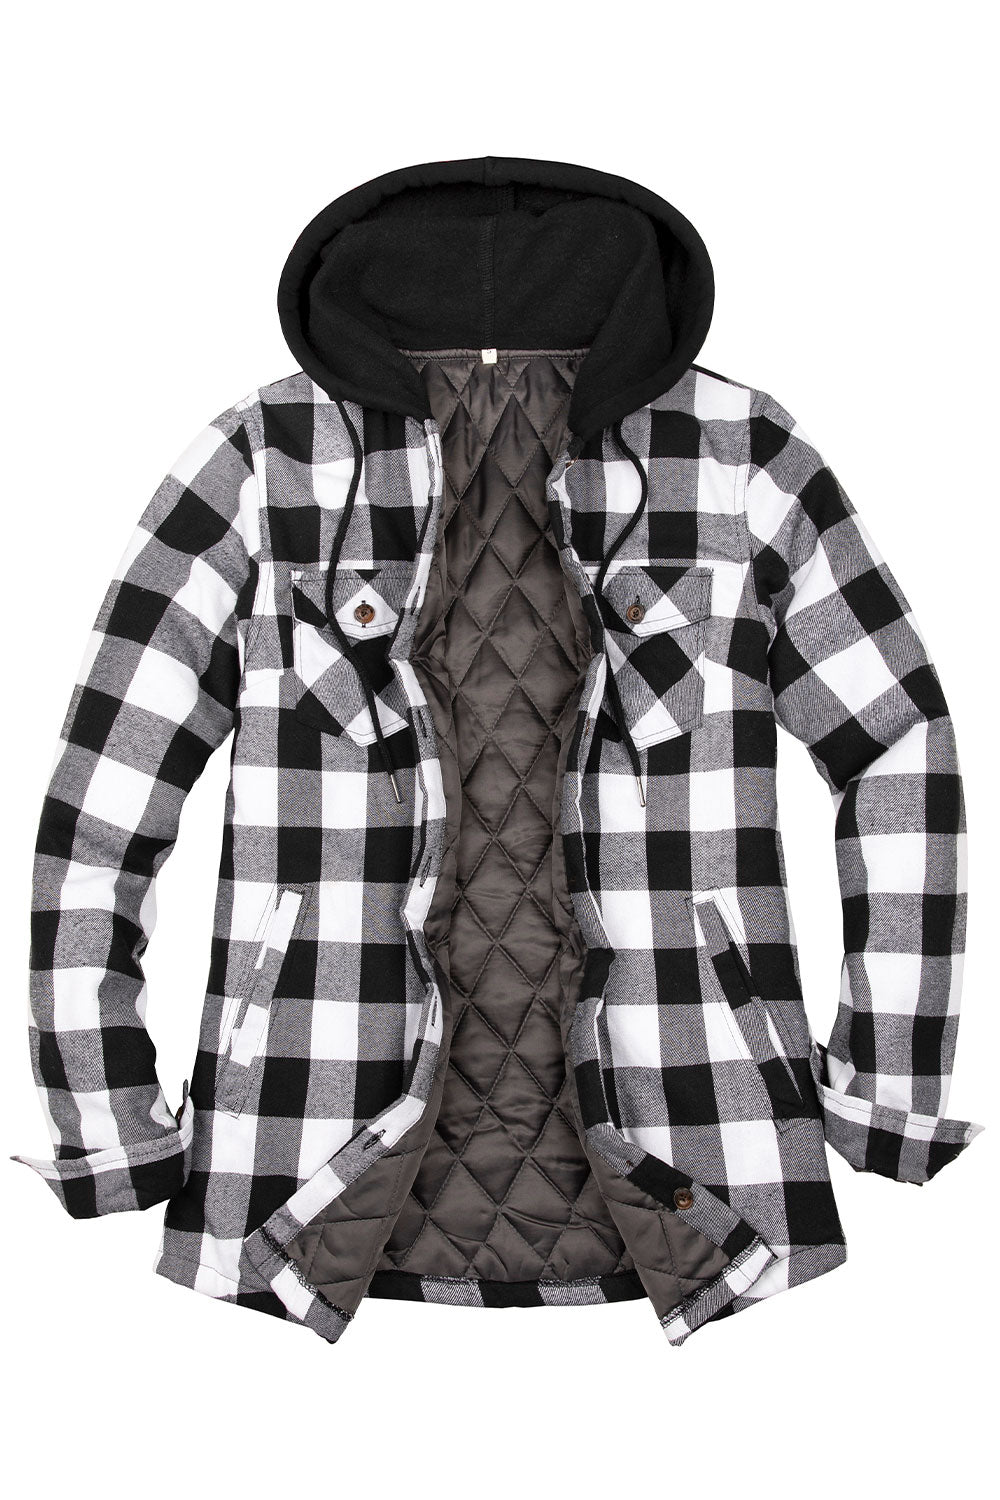 Women's Quilted Lined Hooded Plaid Flannel Shirt Jacket with Hood